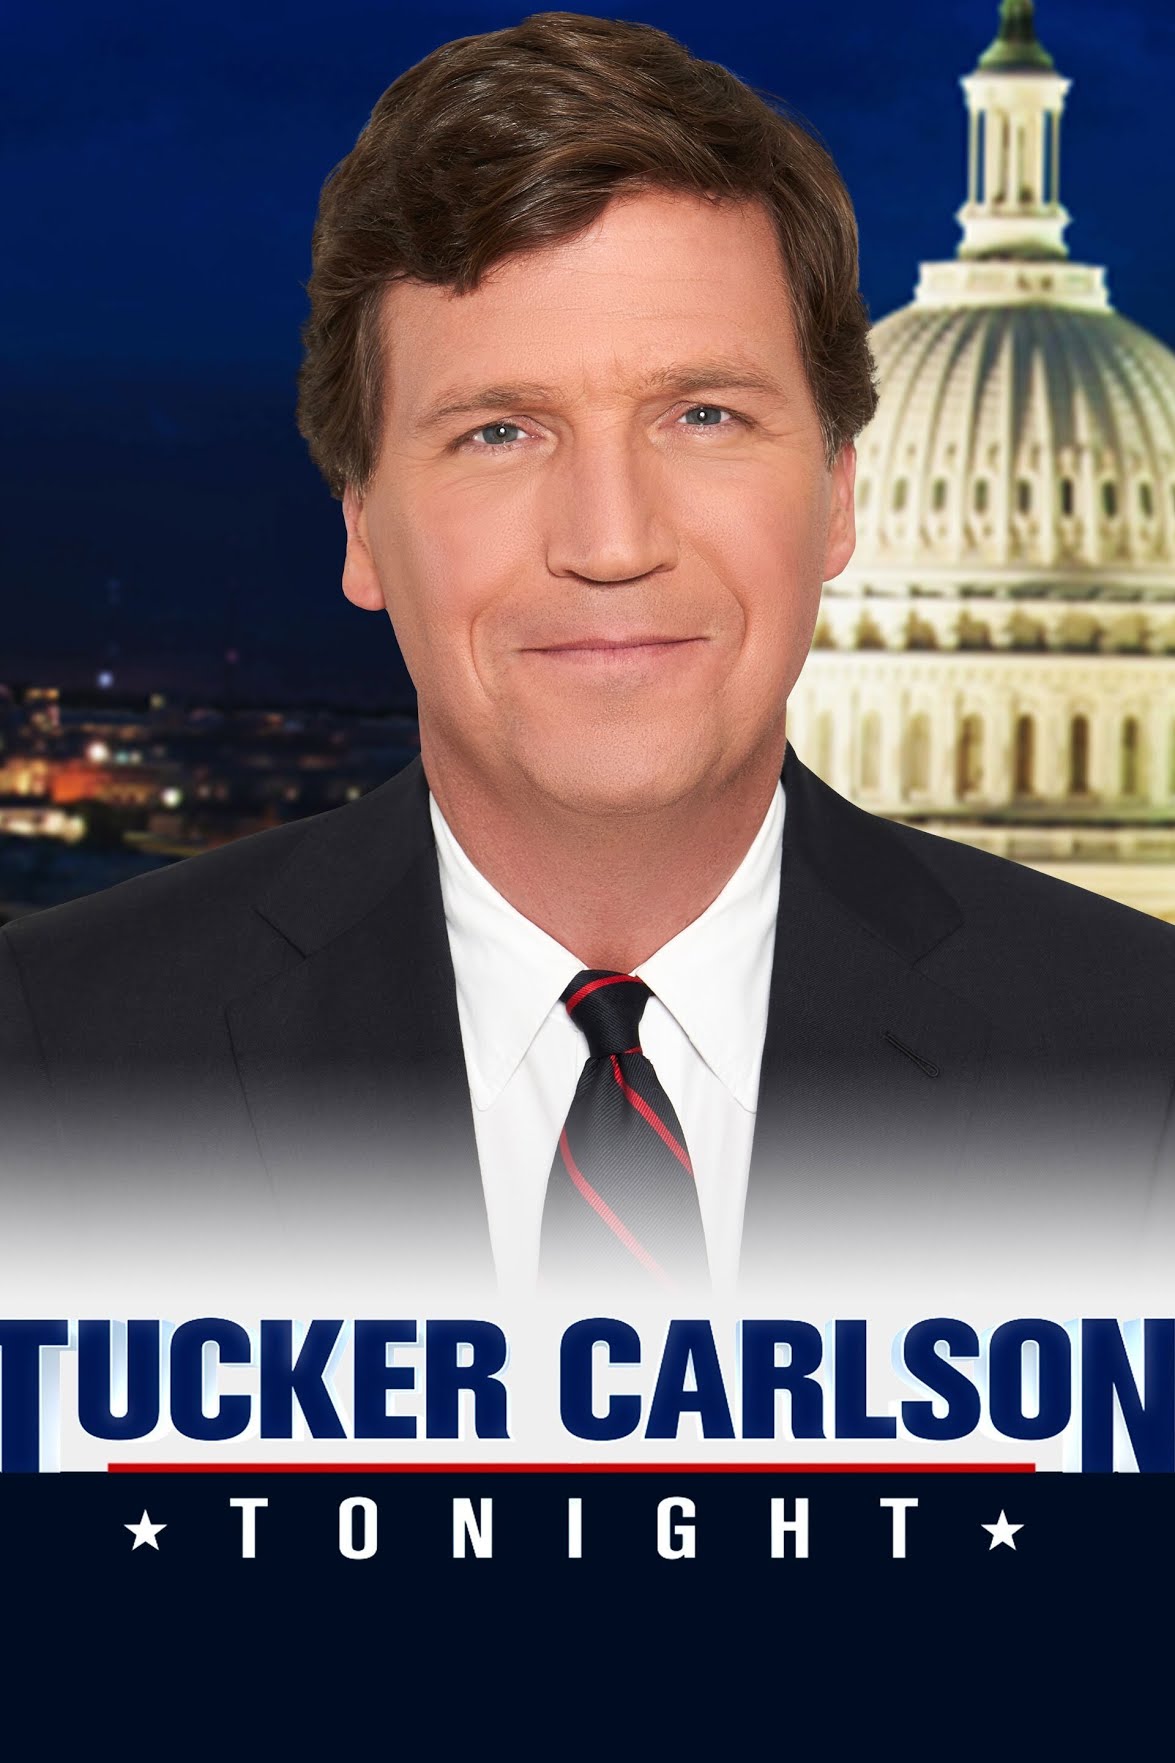 Tucker Carlson in the banner picture of his show